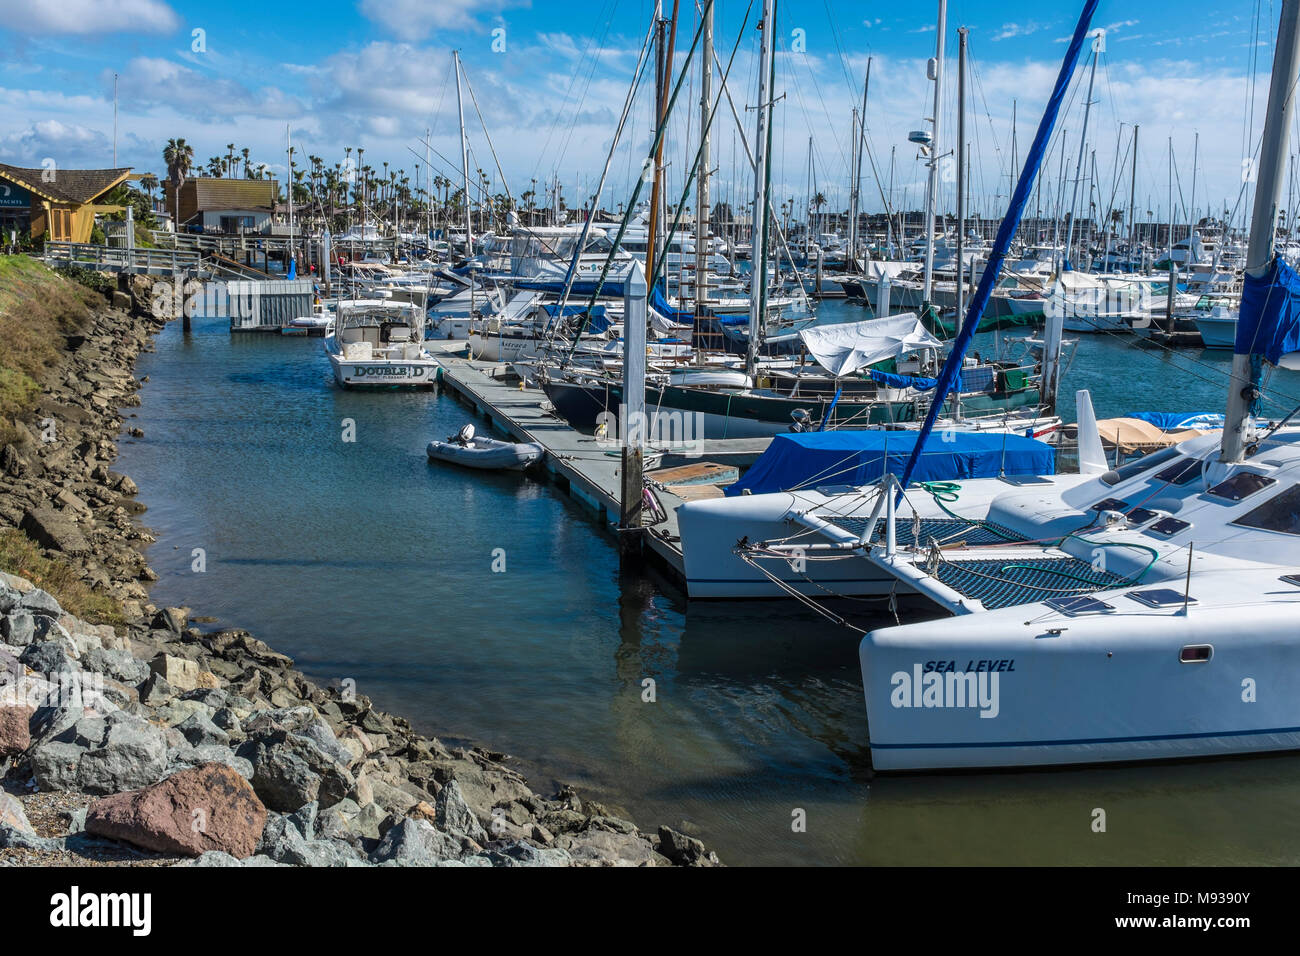 SAN DIEGO, CALIFORNIA, USA - Yachts moored at Yachts Basin on Shelter Island in the city of San Diego. Stock Photo